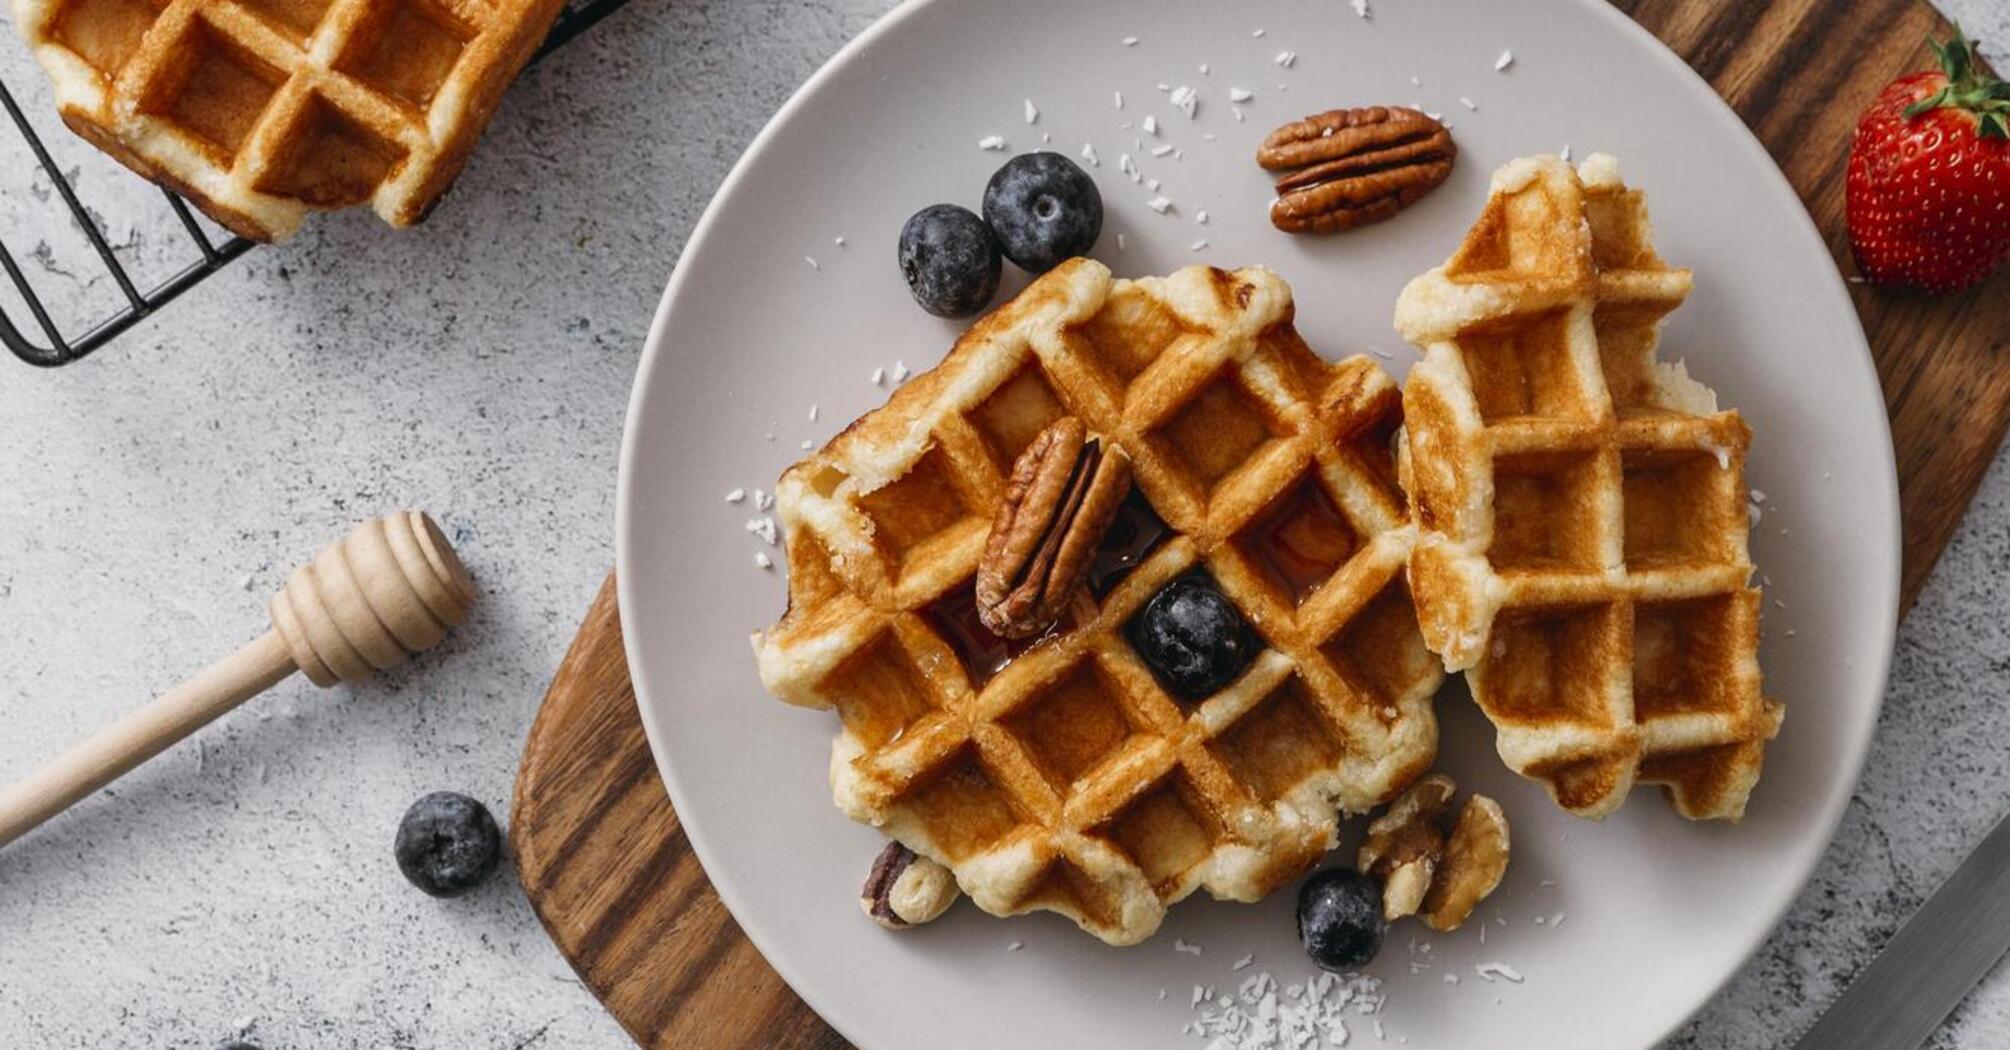 Delicate banana waffles that children will definitely appreciate: cooked in 5 minutes